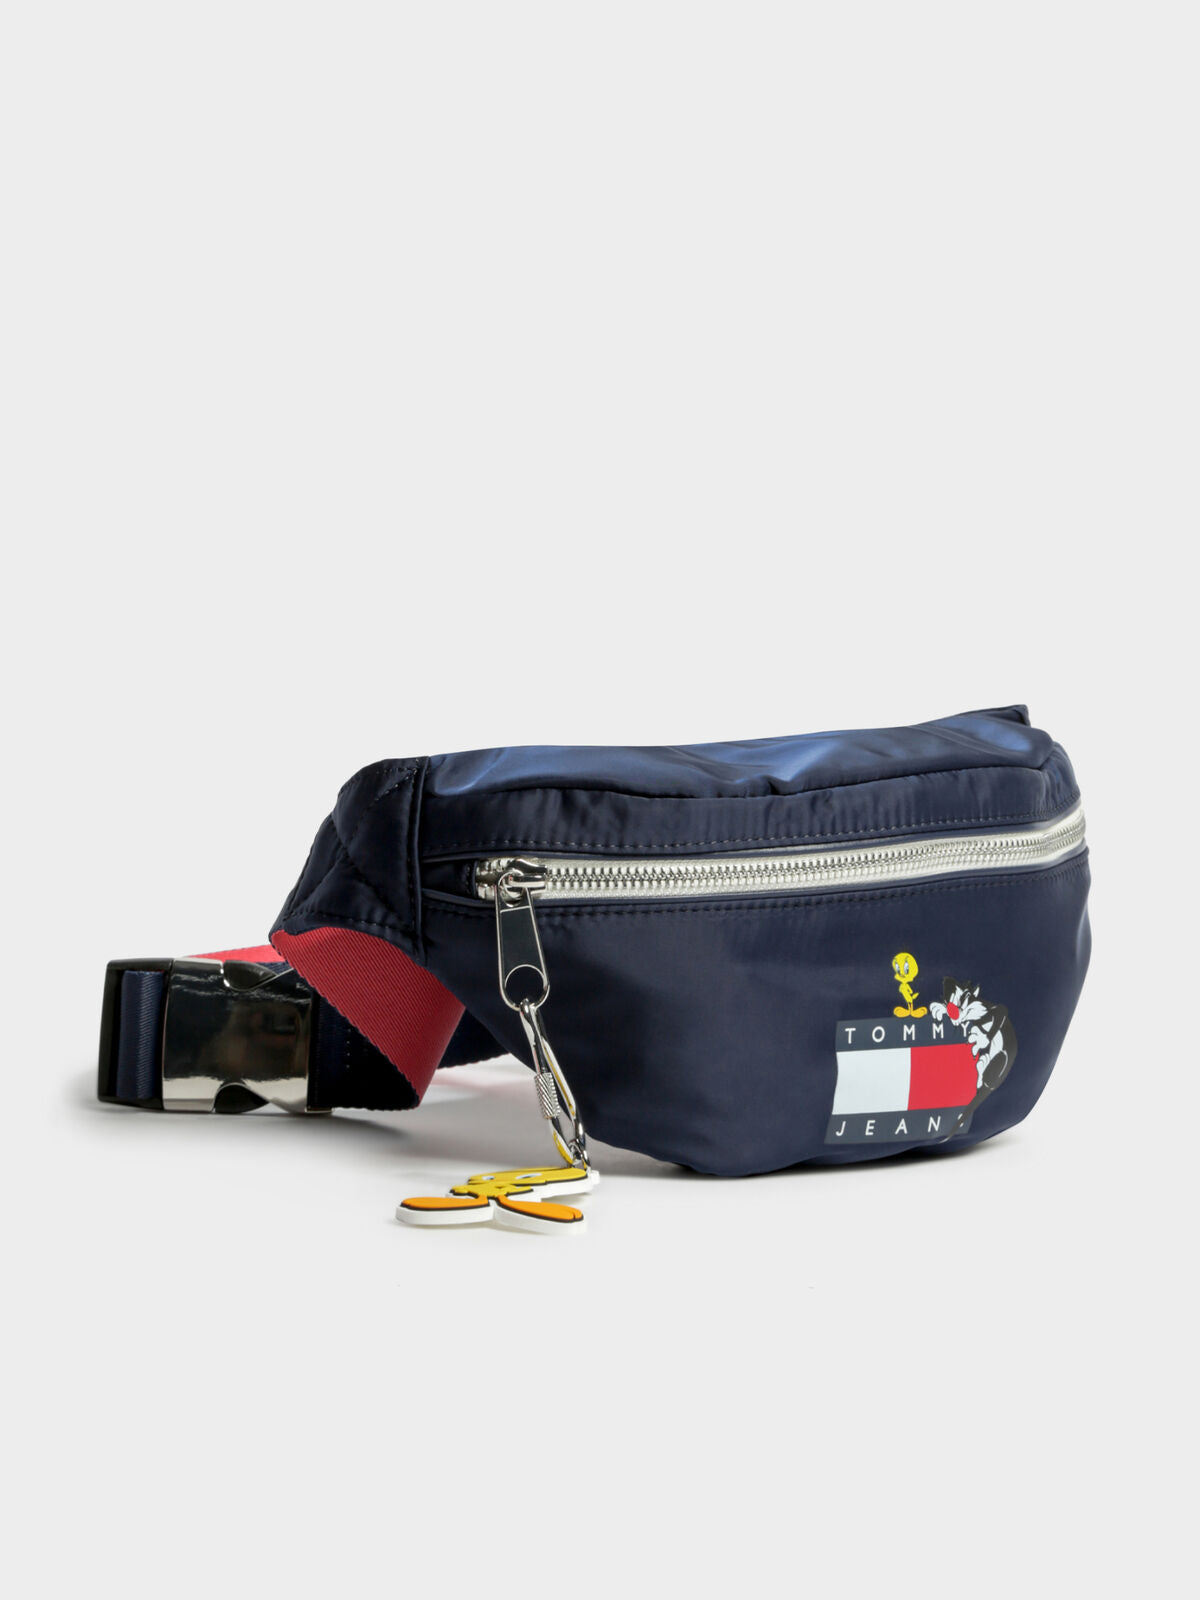 Tommy Jeans x Looney Tunes Bumbag in Twilight Navy